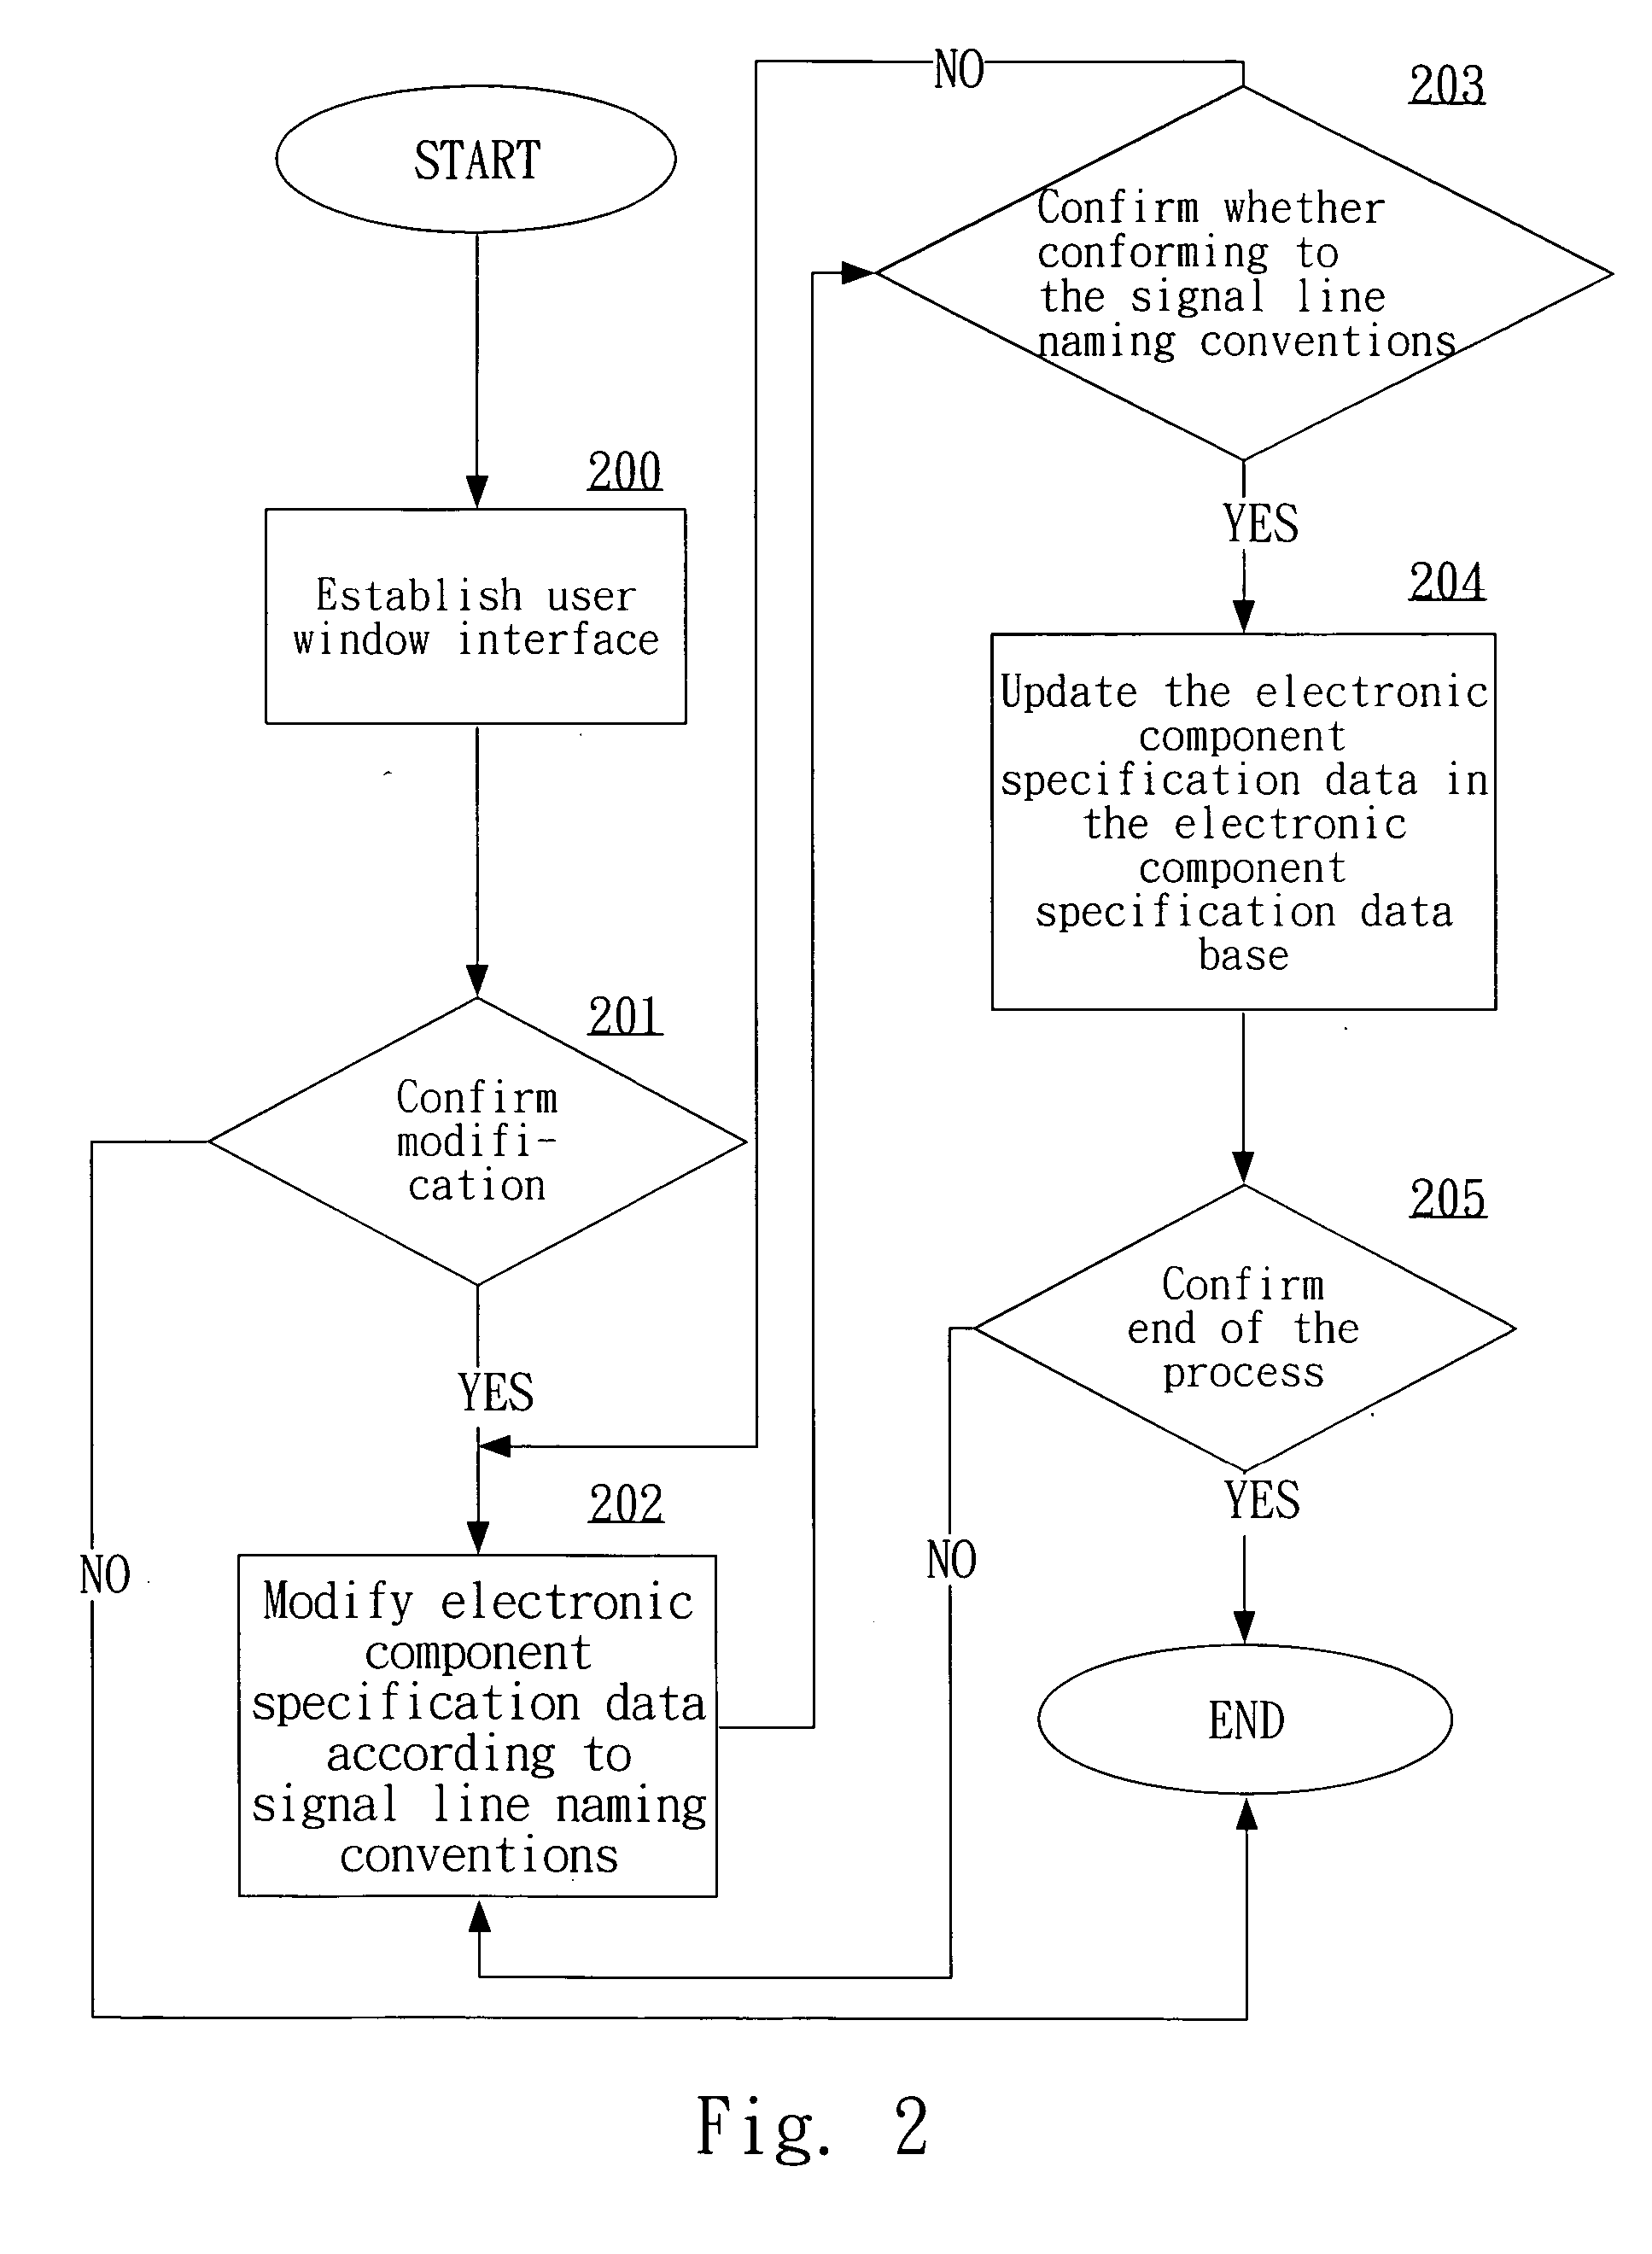 Computer-assisted electronic component schematic linking method